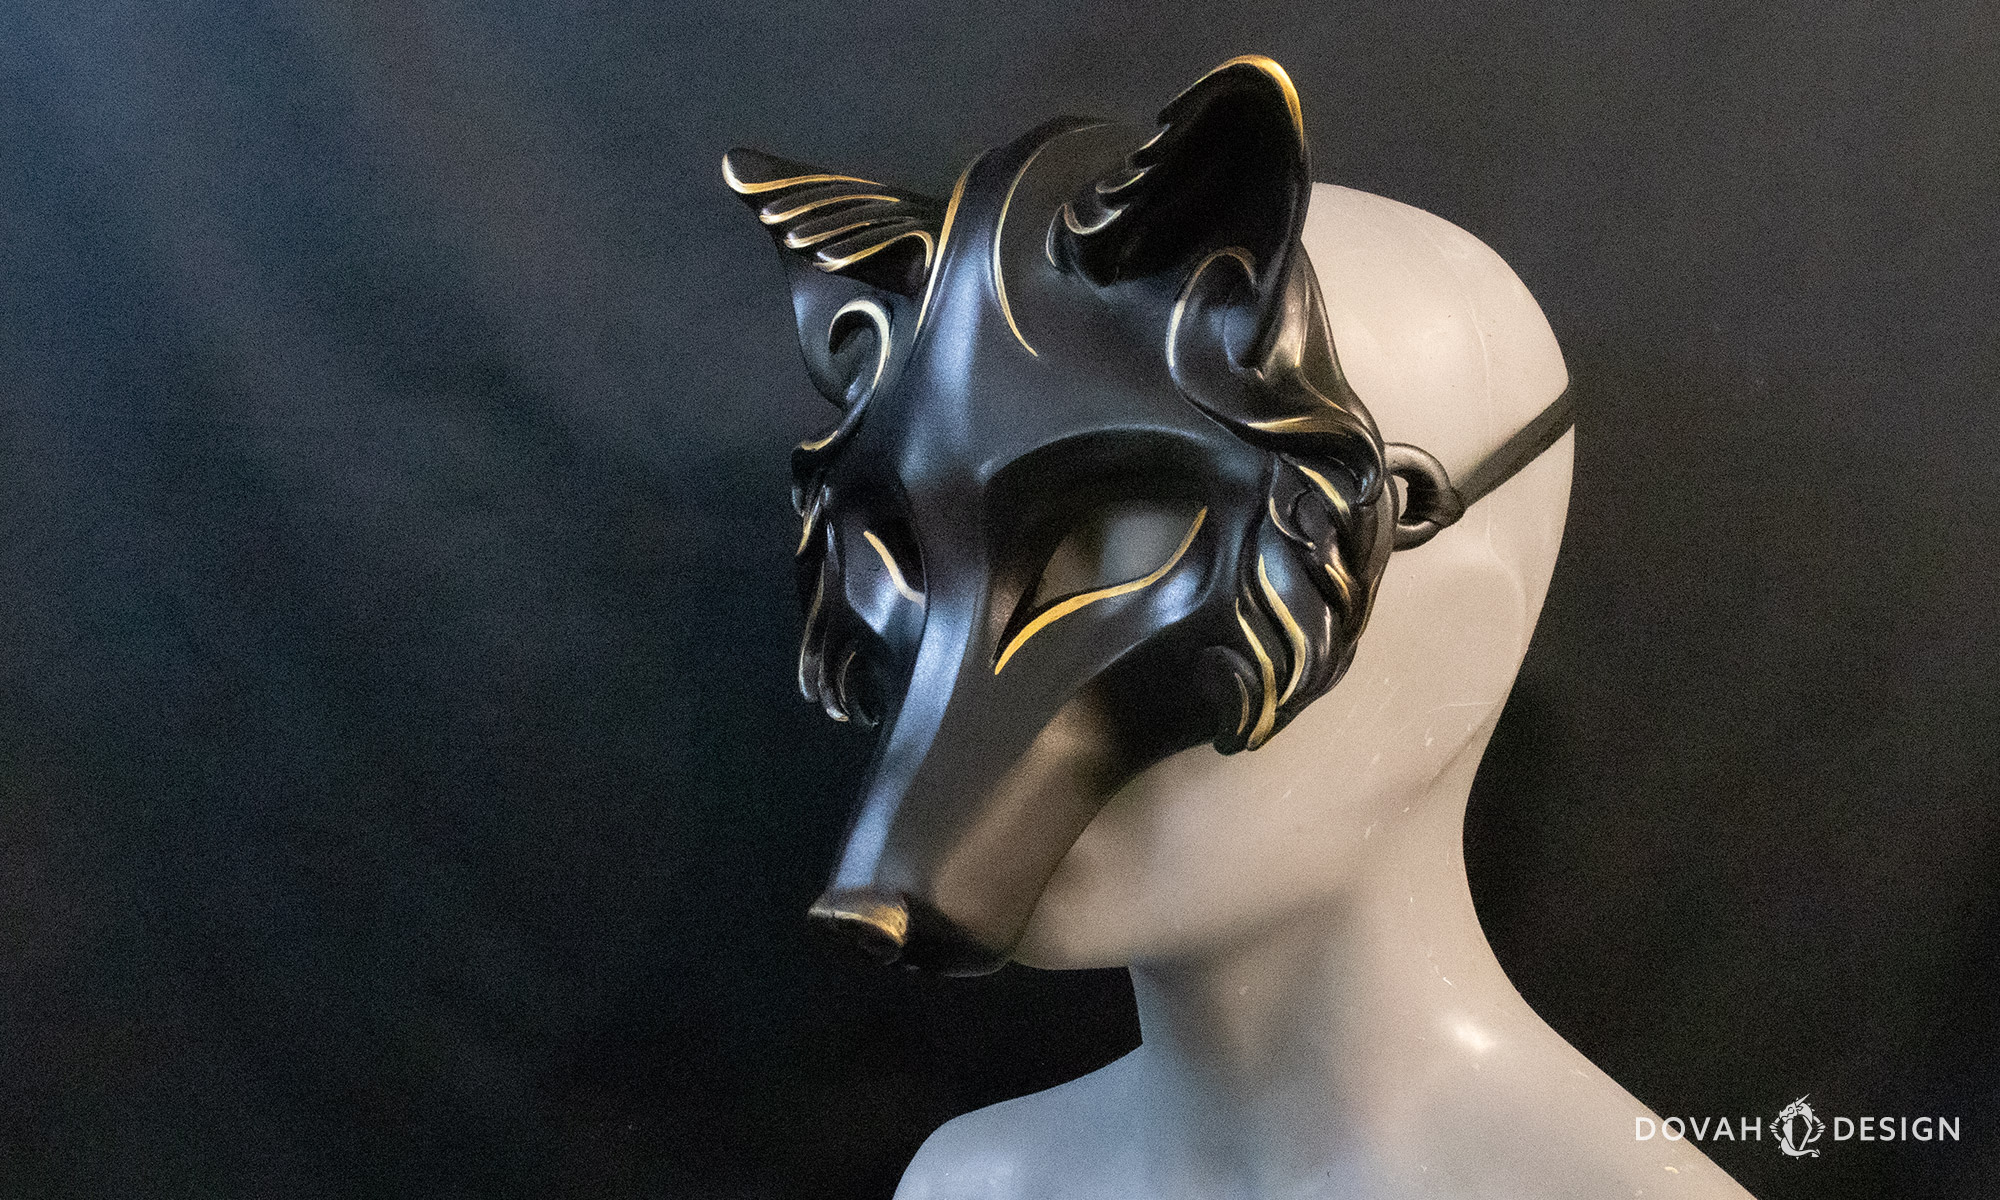 Angled view of a black masquerade wolf mask with gold details painted, shown tied on a mannequin bust in front of a black background.